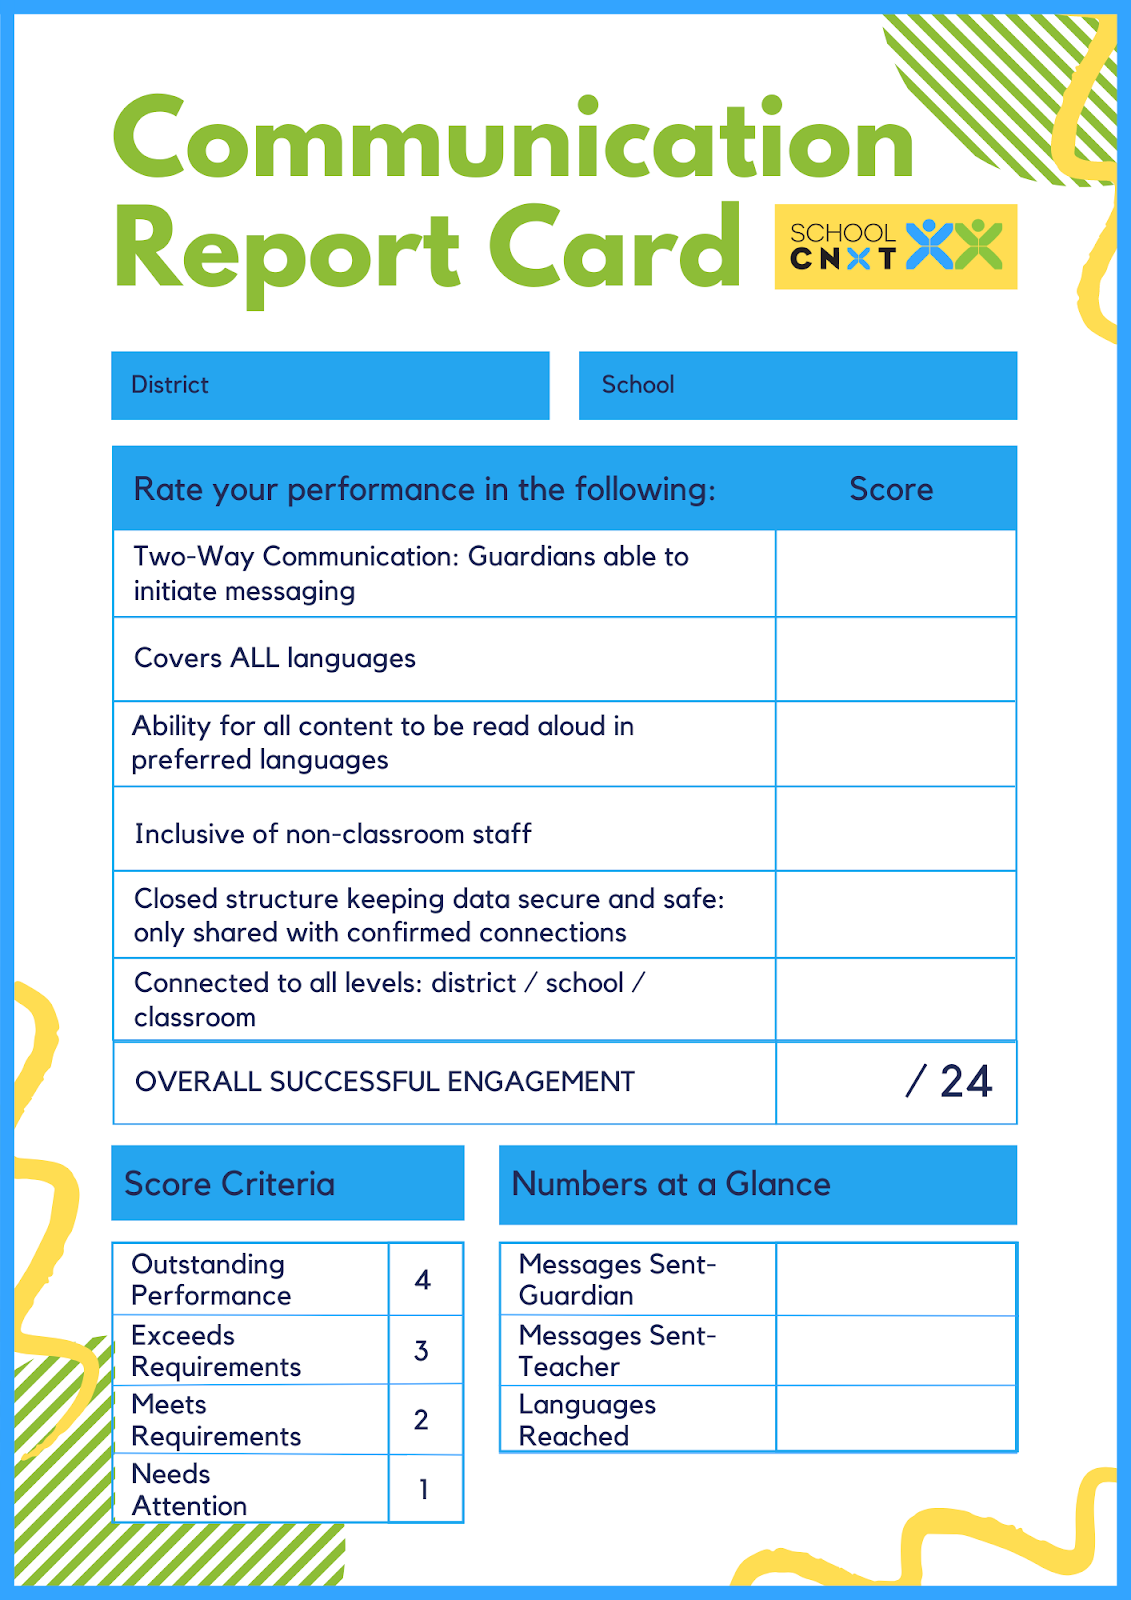 image of a school communication report card rating performance, effectiveness, and inclusivity.